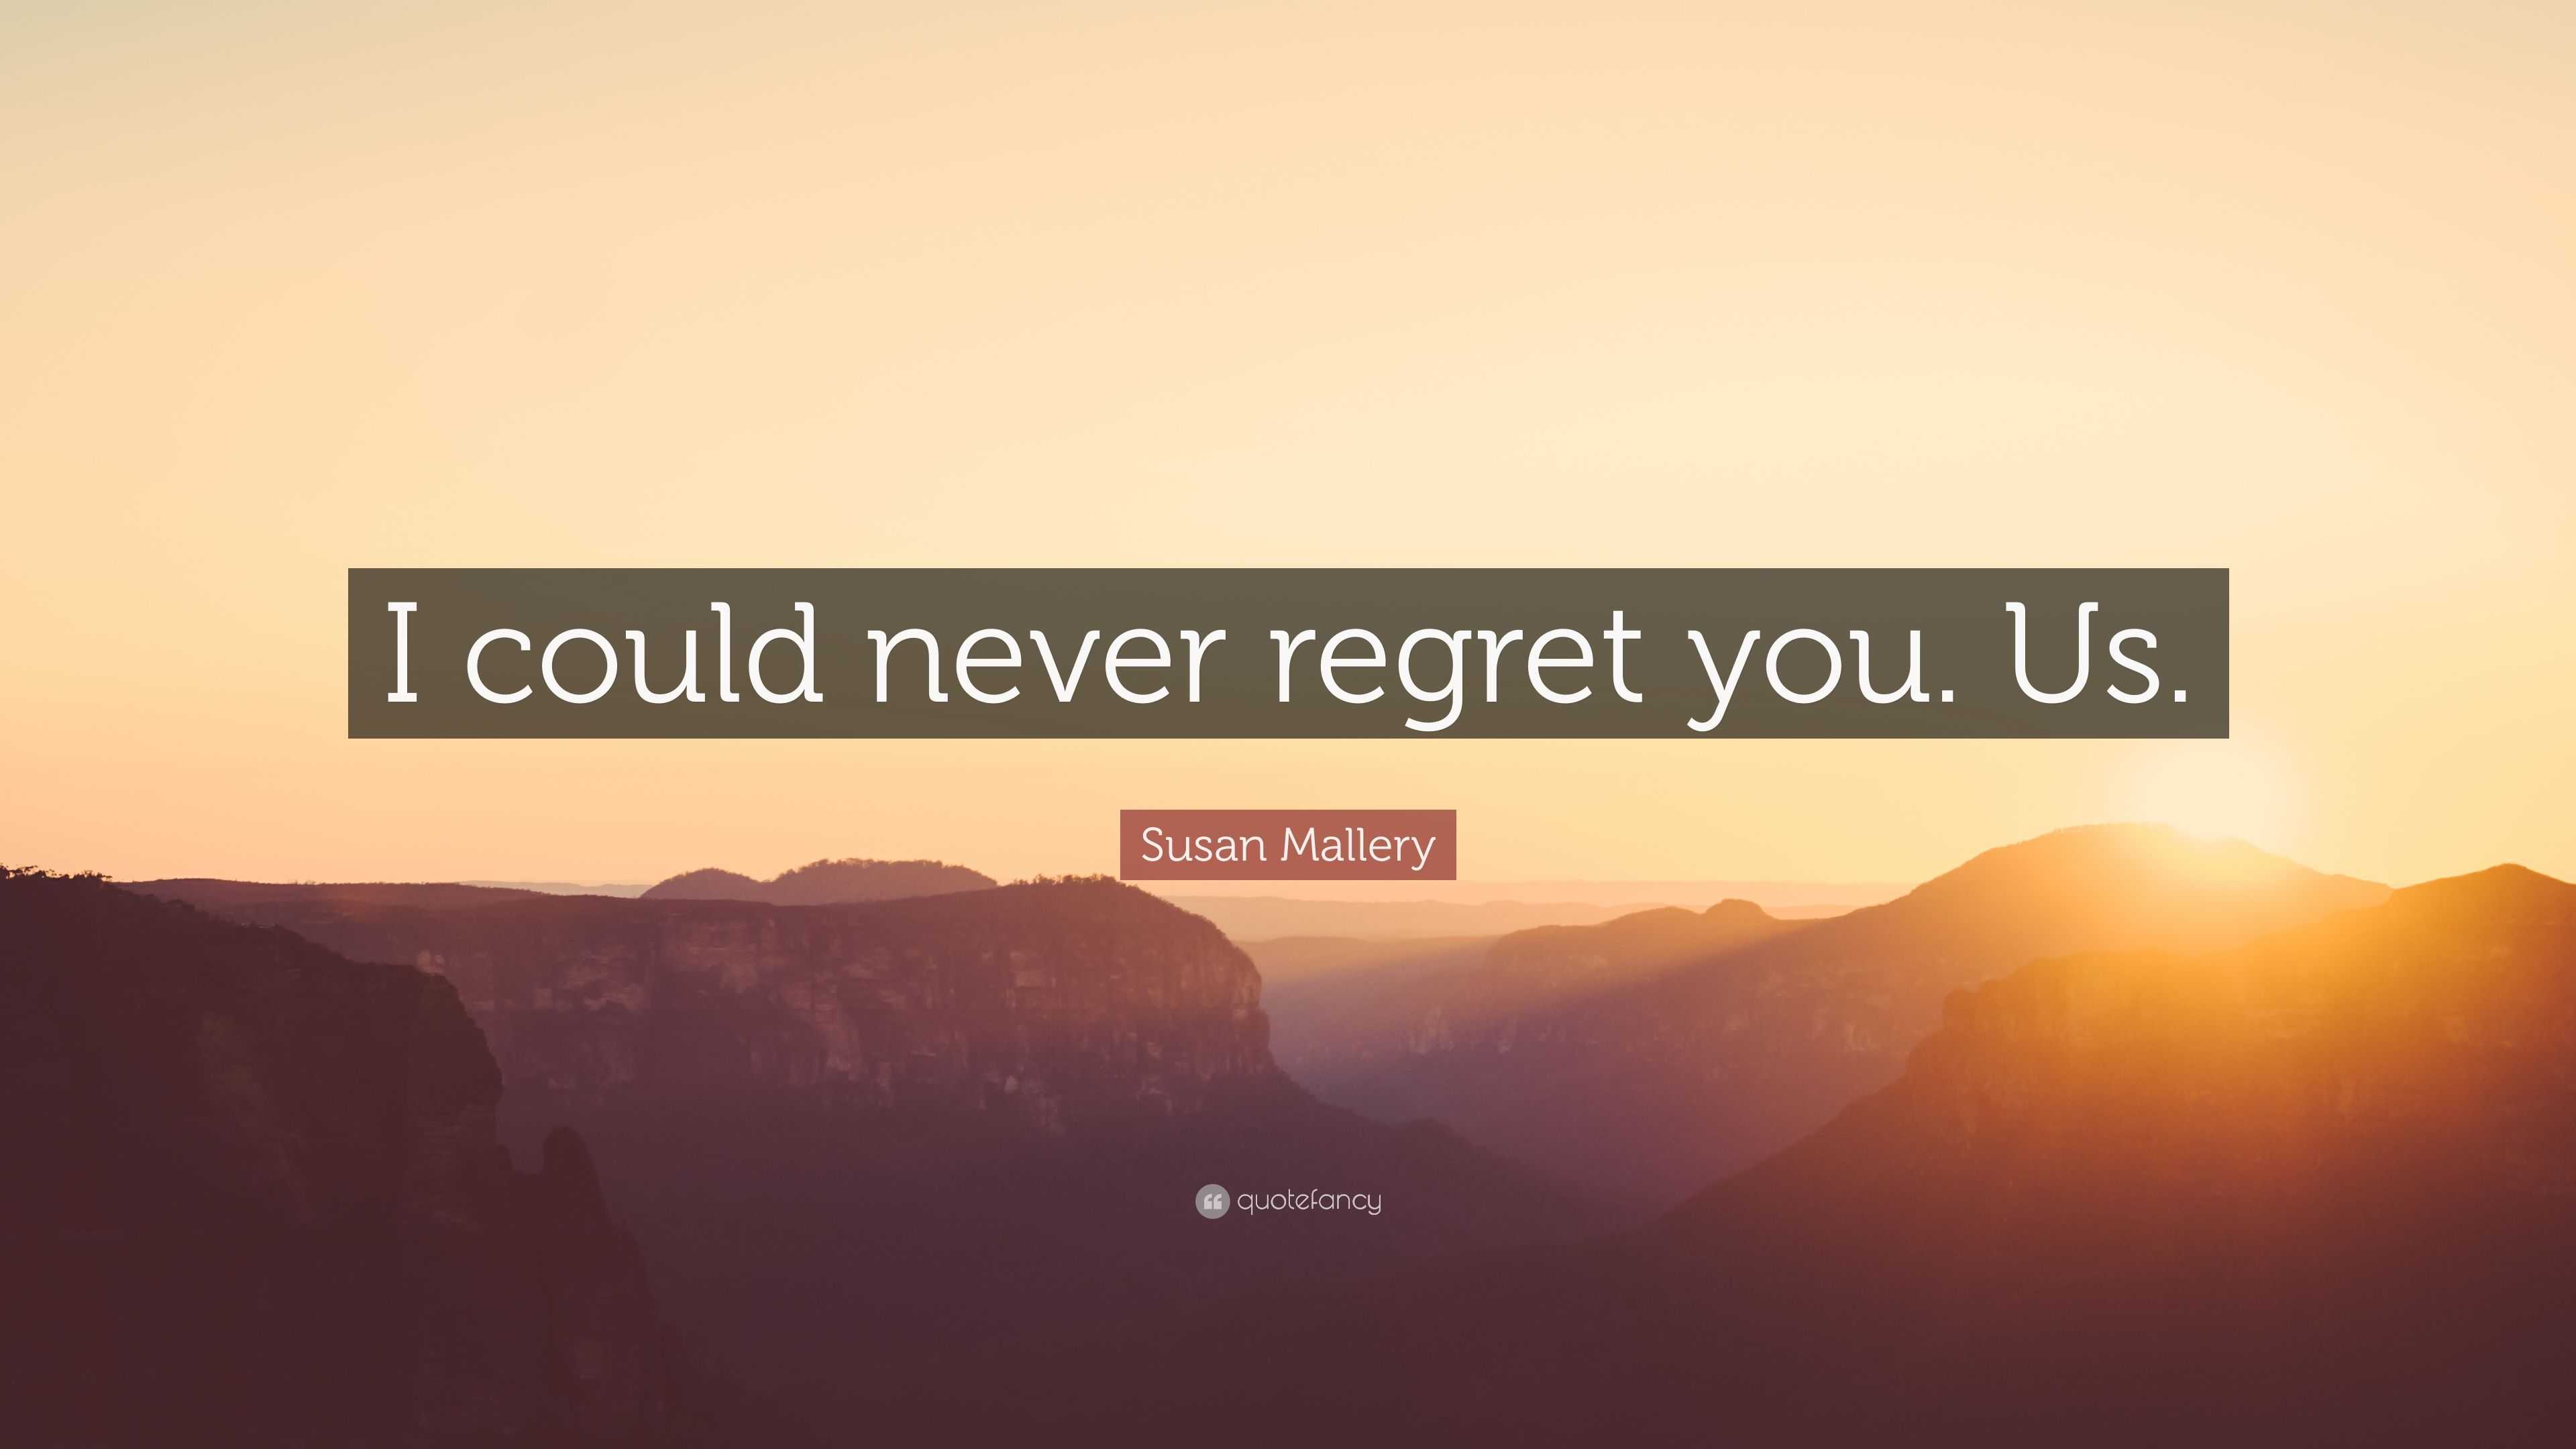 Susan Mallery Quote: “I could never regret you. Us.”